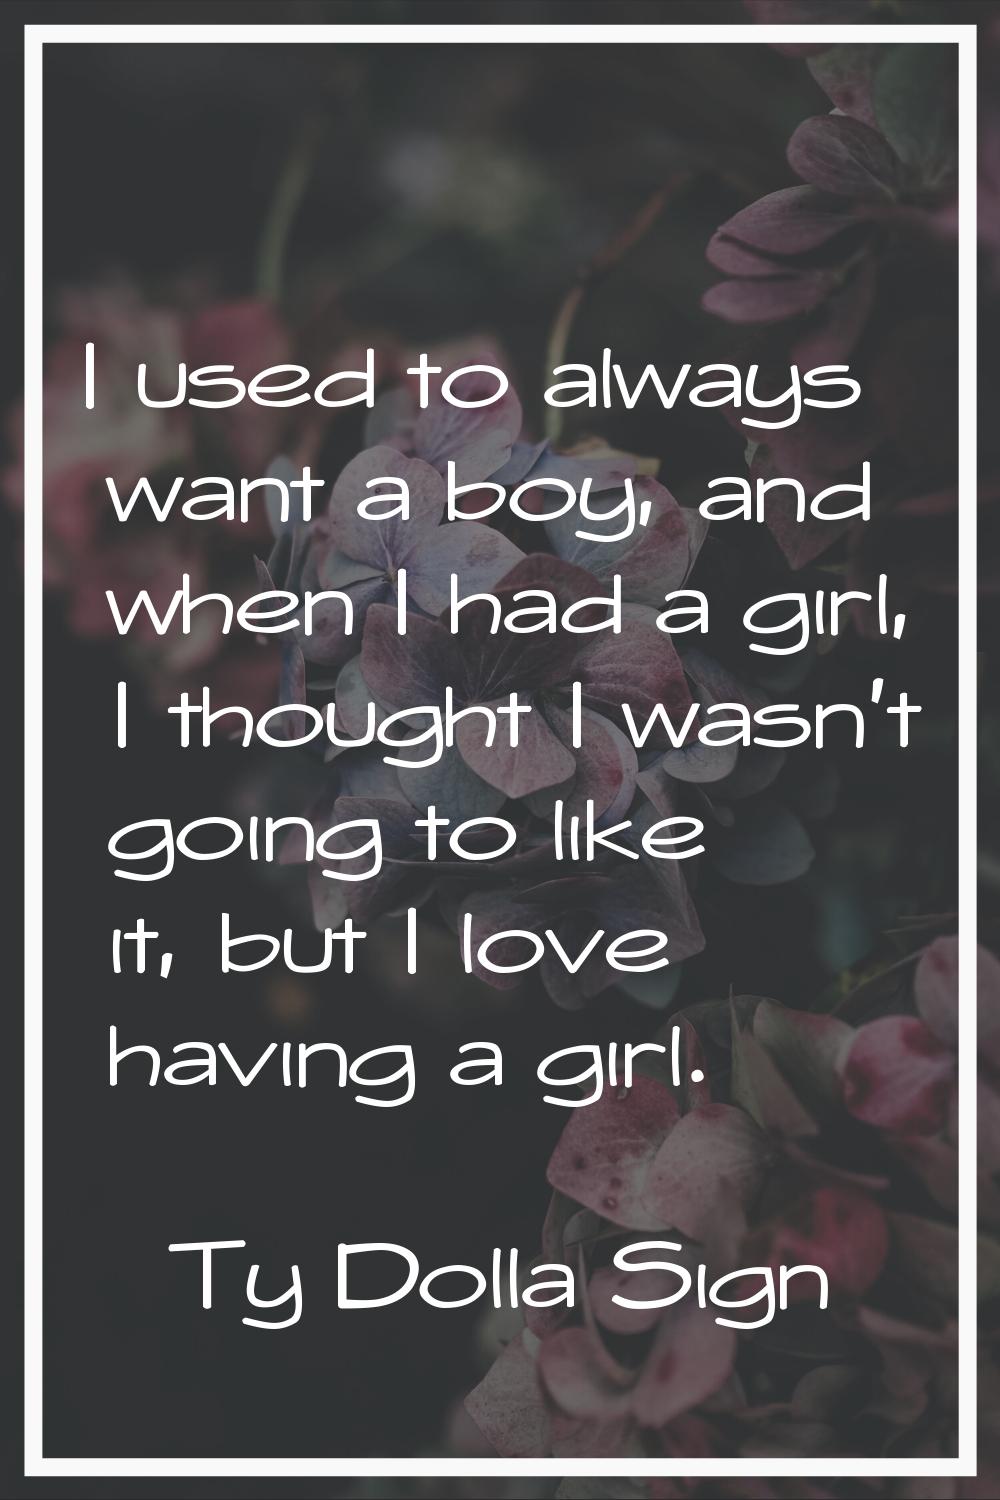 I used to always want a boy, and when I had a girl, I thought I wasn't going to like it, but I love